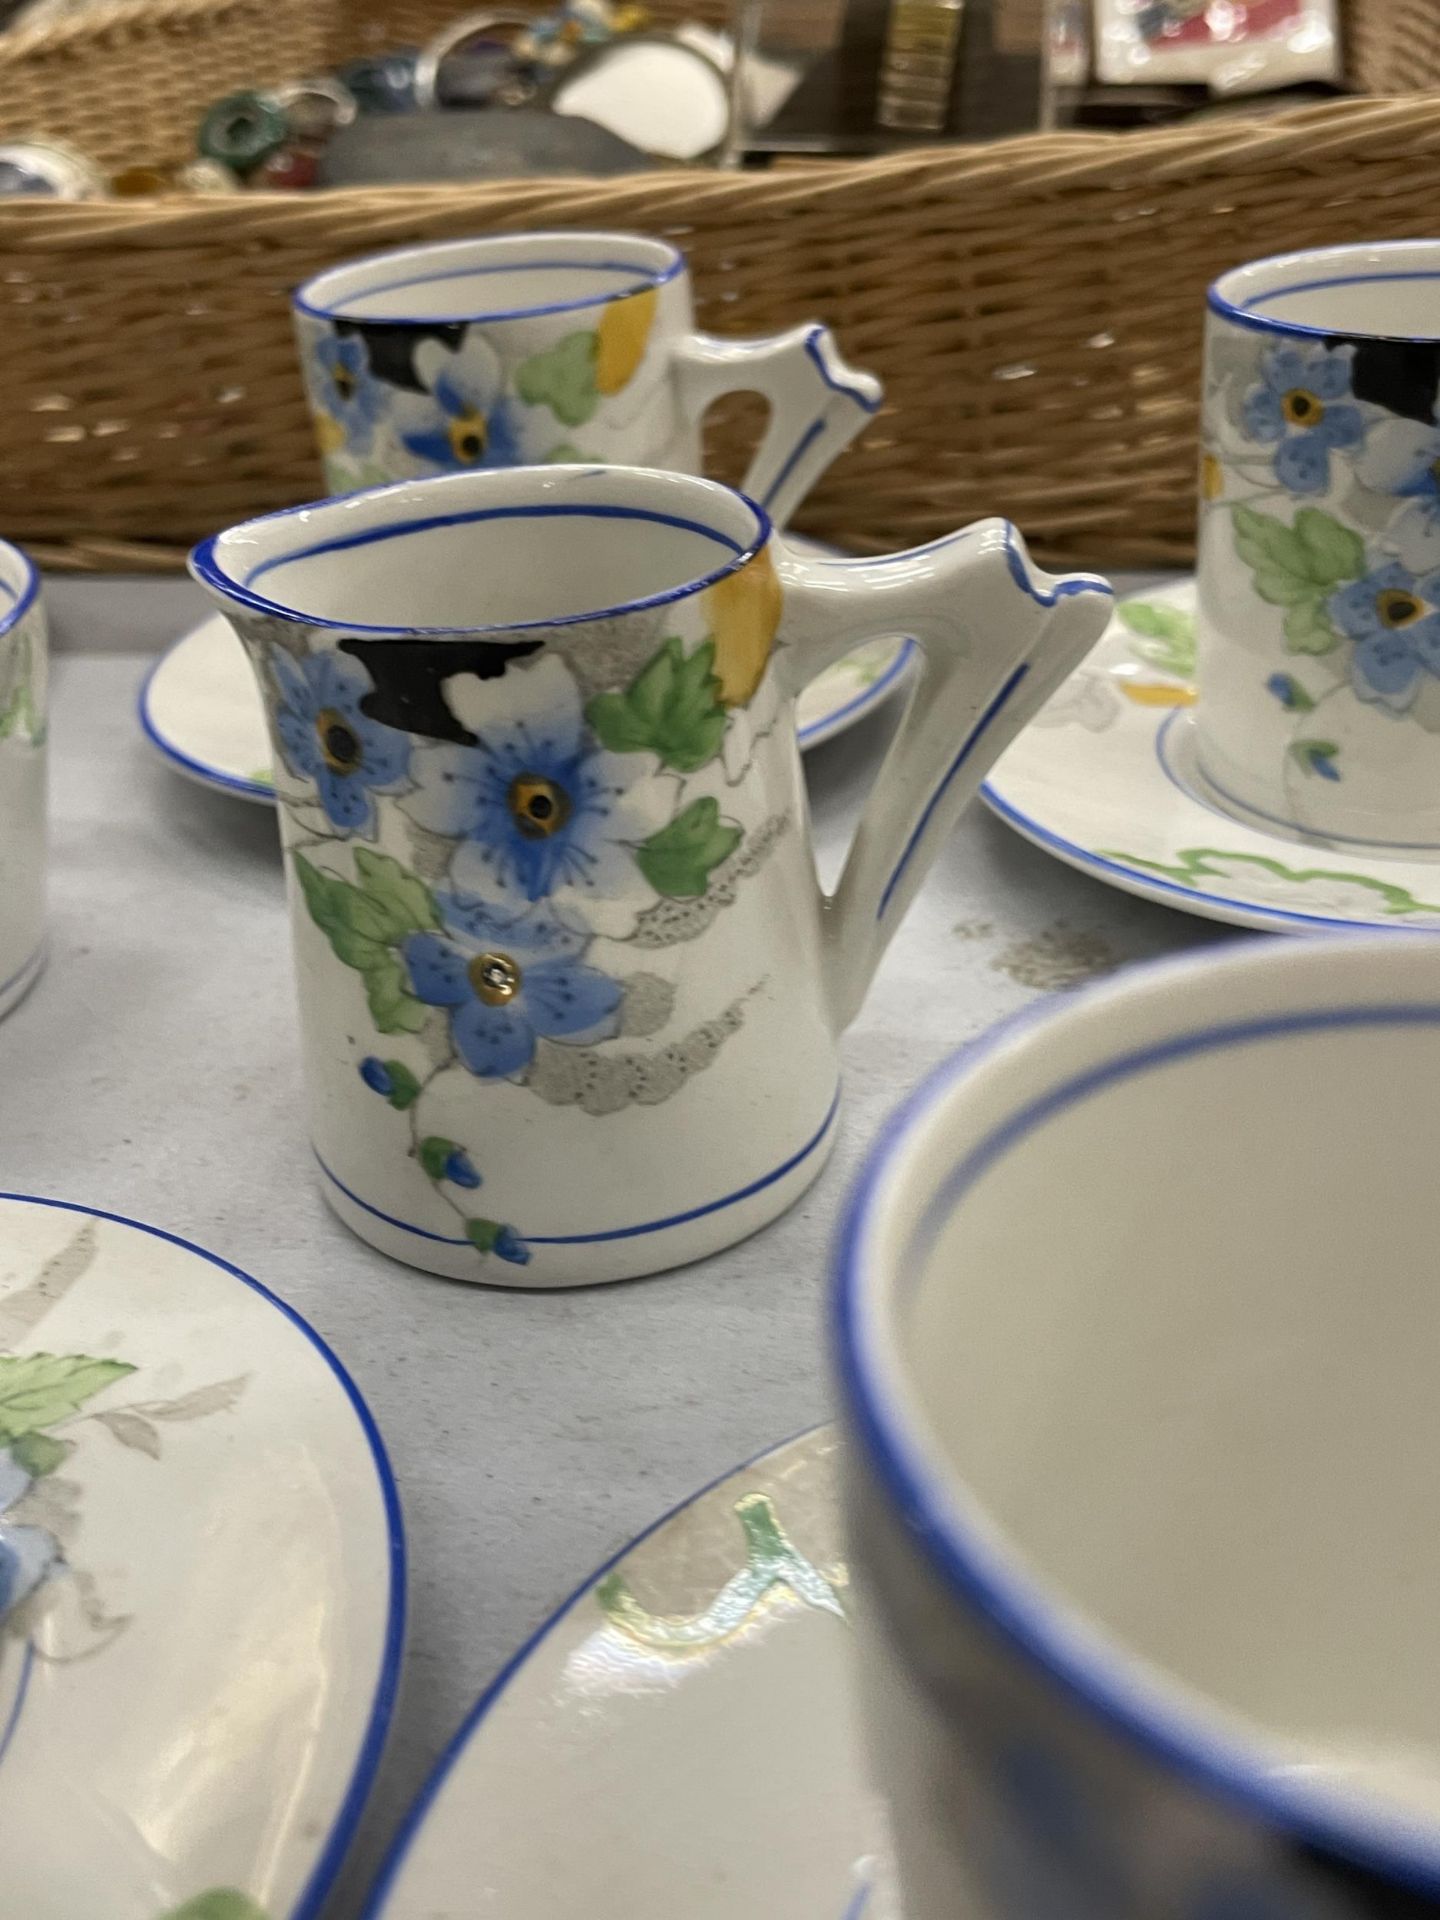 A SMALL VICTORIAN TEASET WITH FLORAL PATTERN TO INCLUDE A SUGAR BOWL, CREAM JUG, CUPS AND SAUCERS - Image 4 of 4